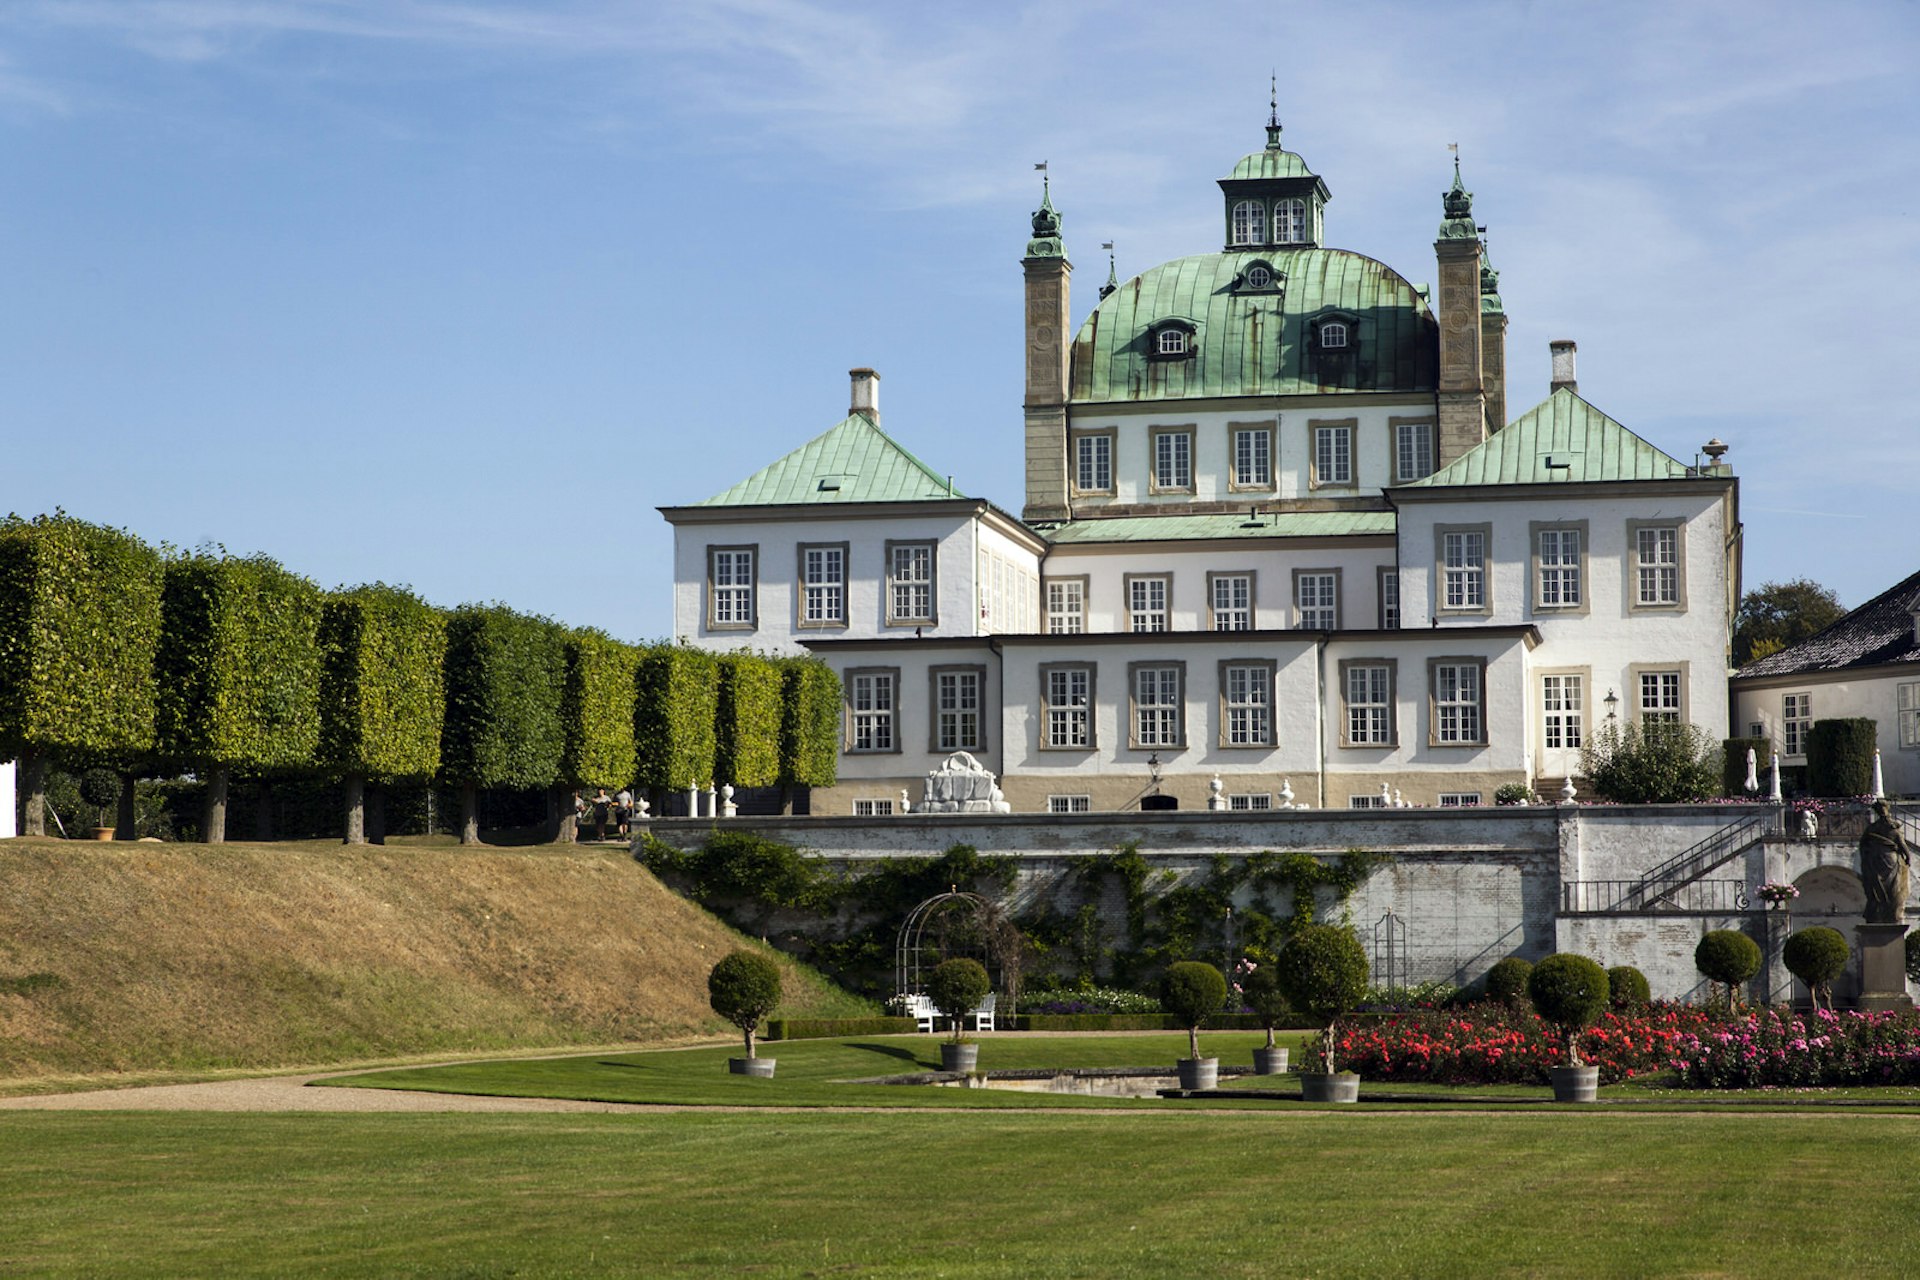 A green manicured lawn and row of large, square-shaped trees lead up to the rather grand Fredensborg Palace, with its white walls and green copper roof